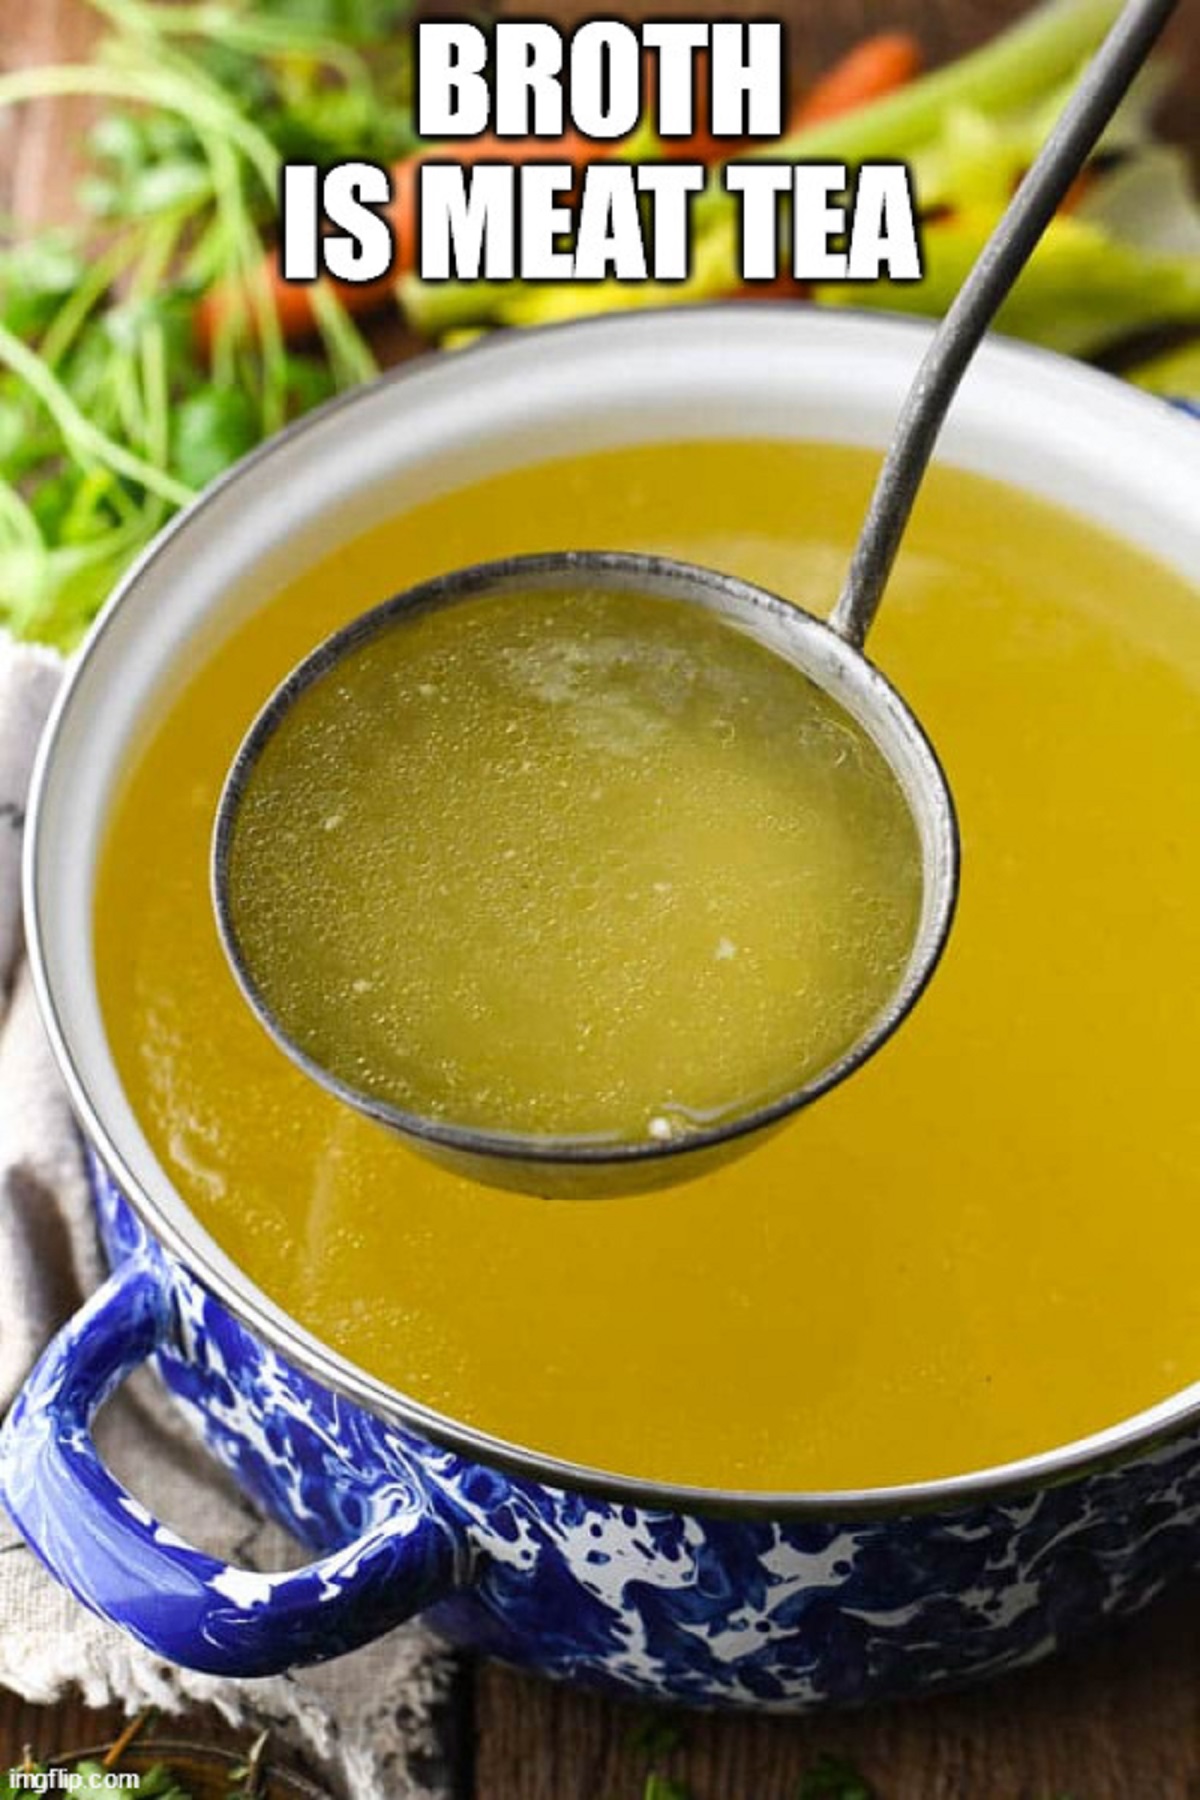 chicken stock soup - imgflip.com Broth Is Meat Tea